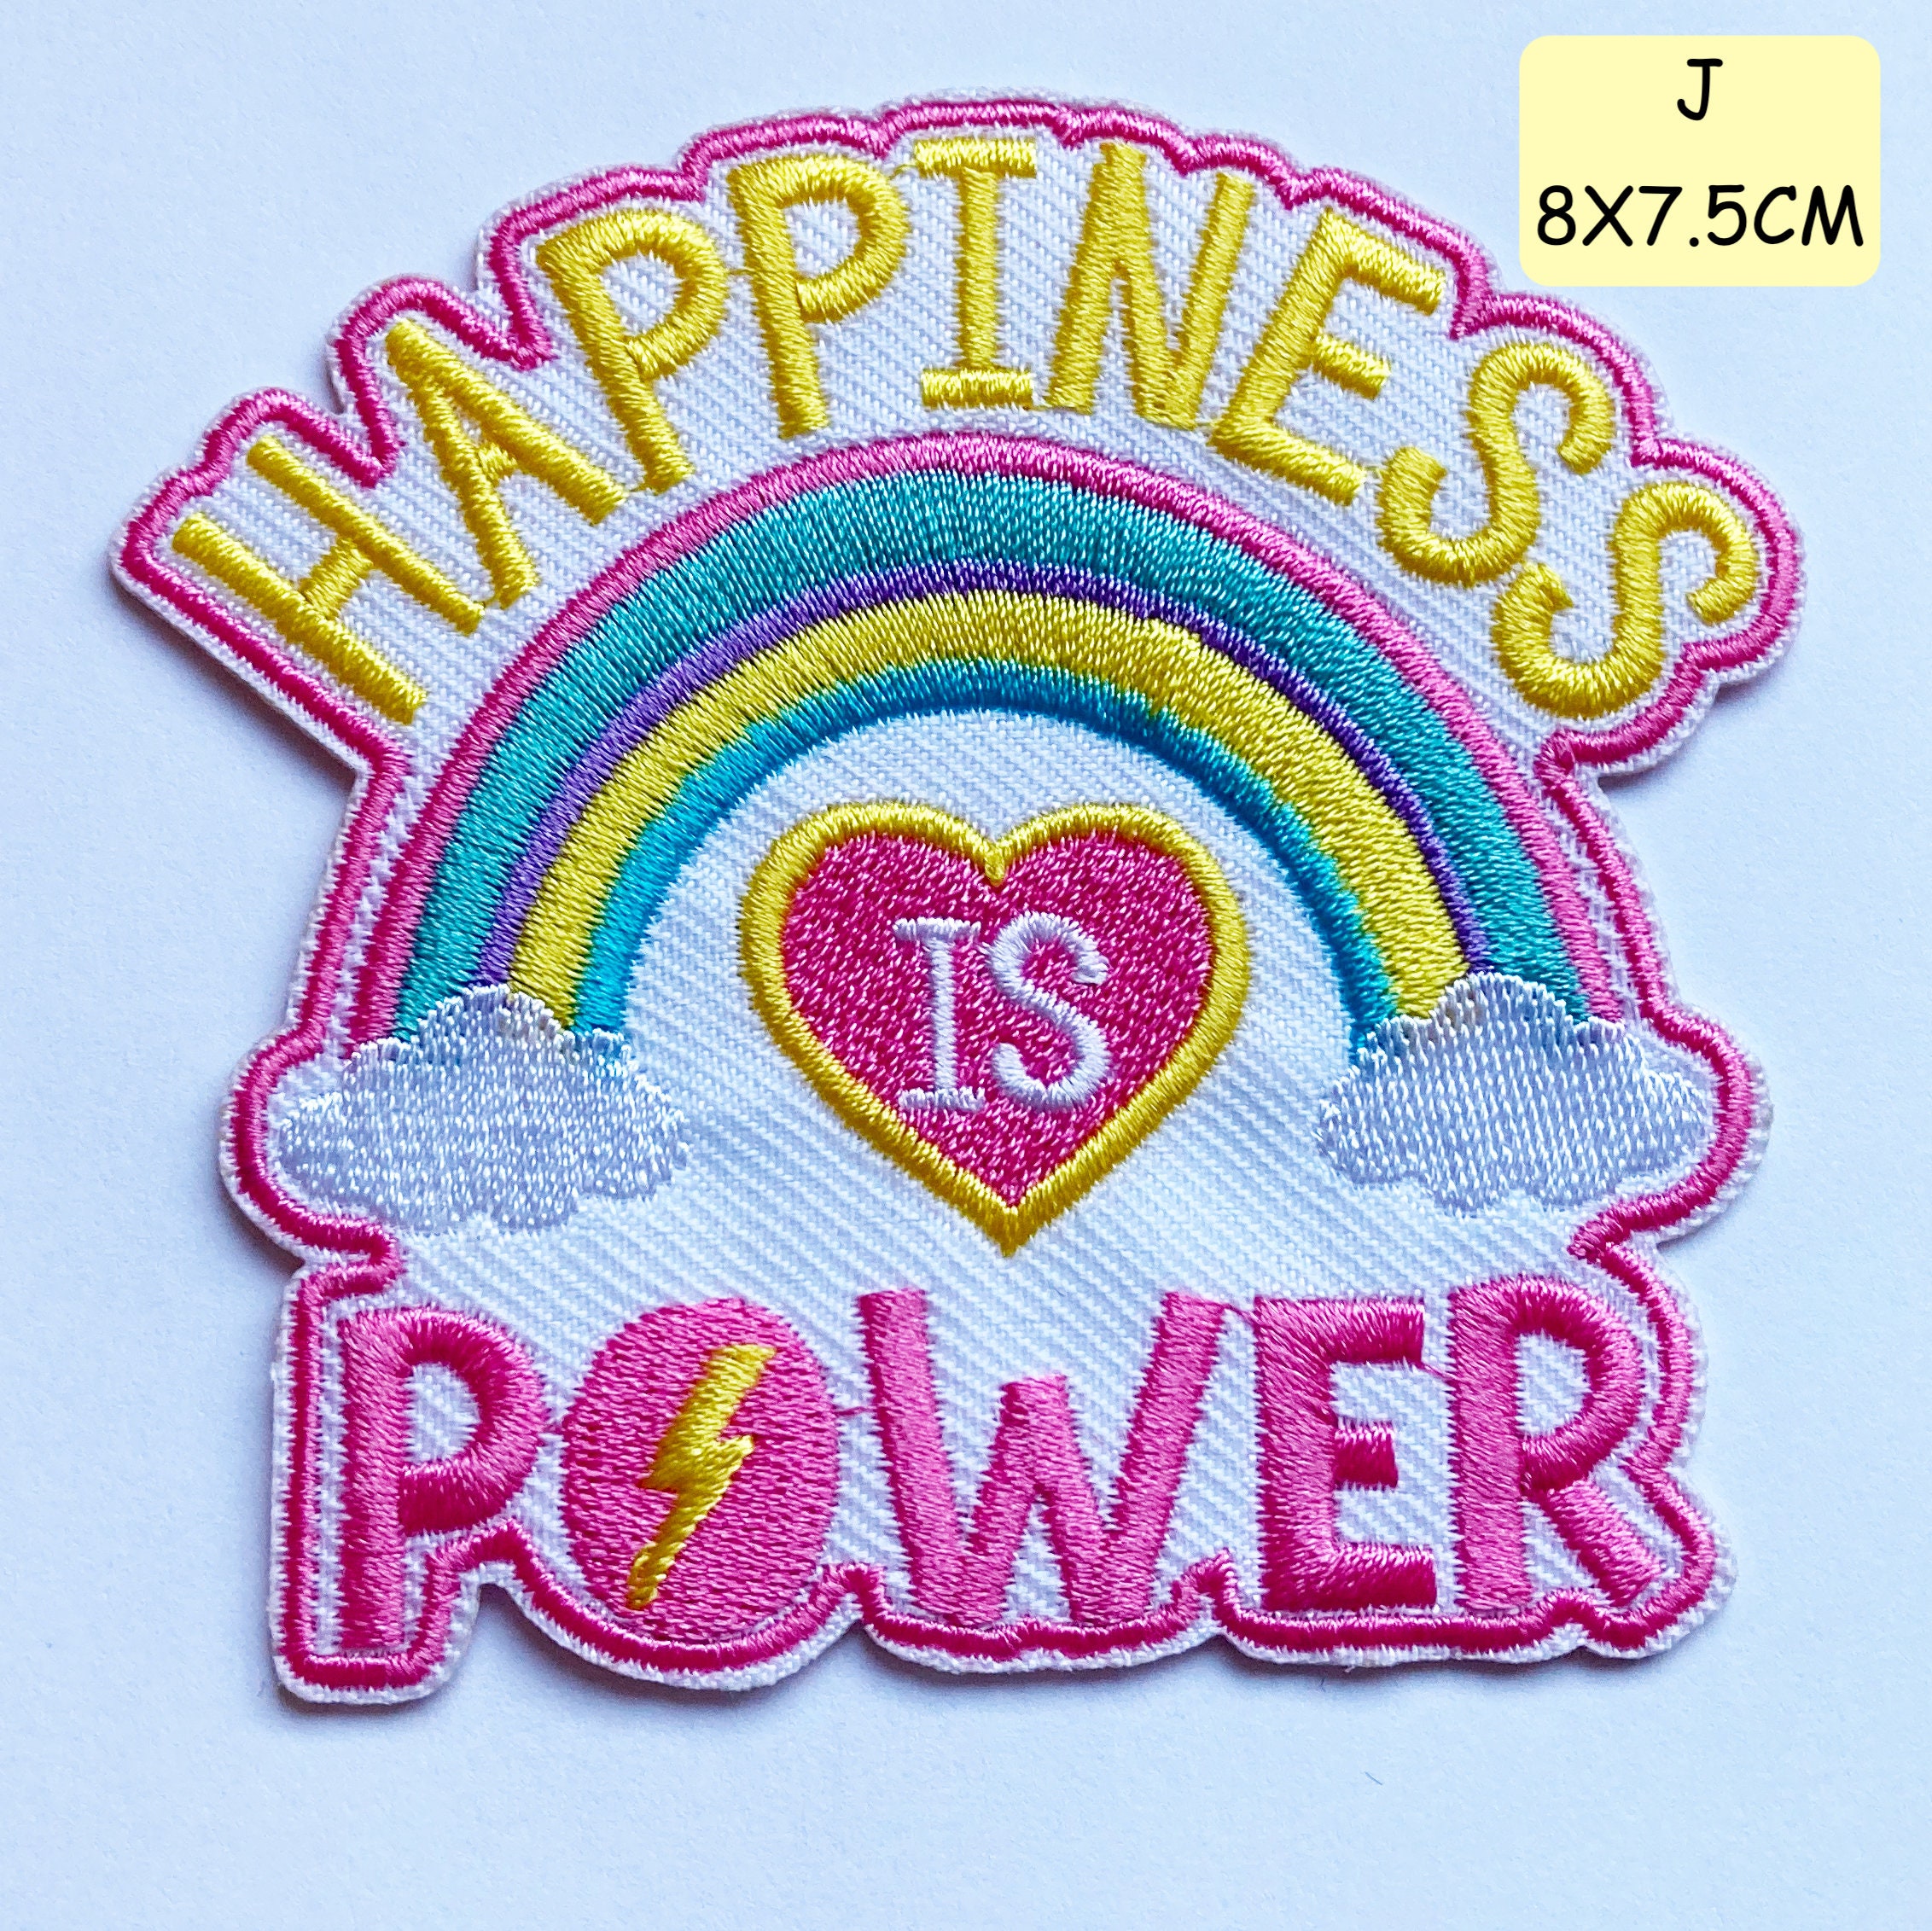 Cute Funny Iron on Patches Happiness, Love, Friendship, Friends,  Embroidered Sew on / Iron on Jeans Bags Clothes Transfer, Badge 